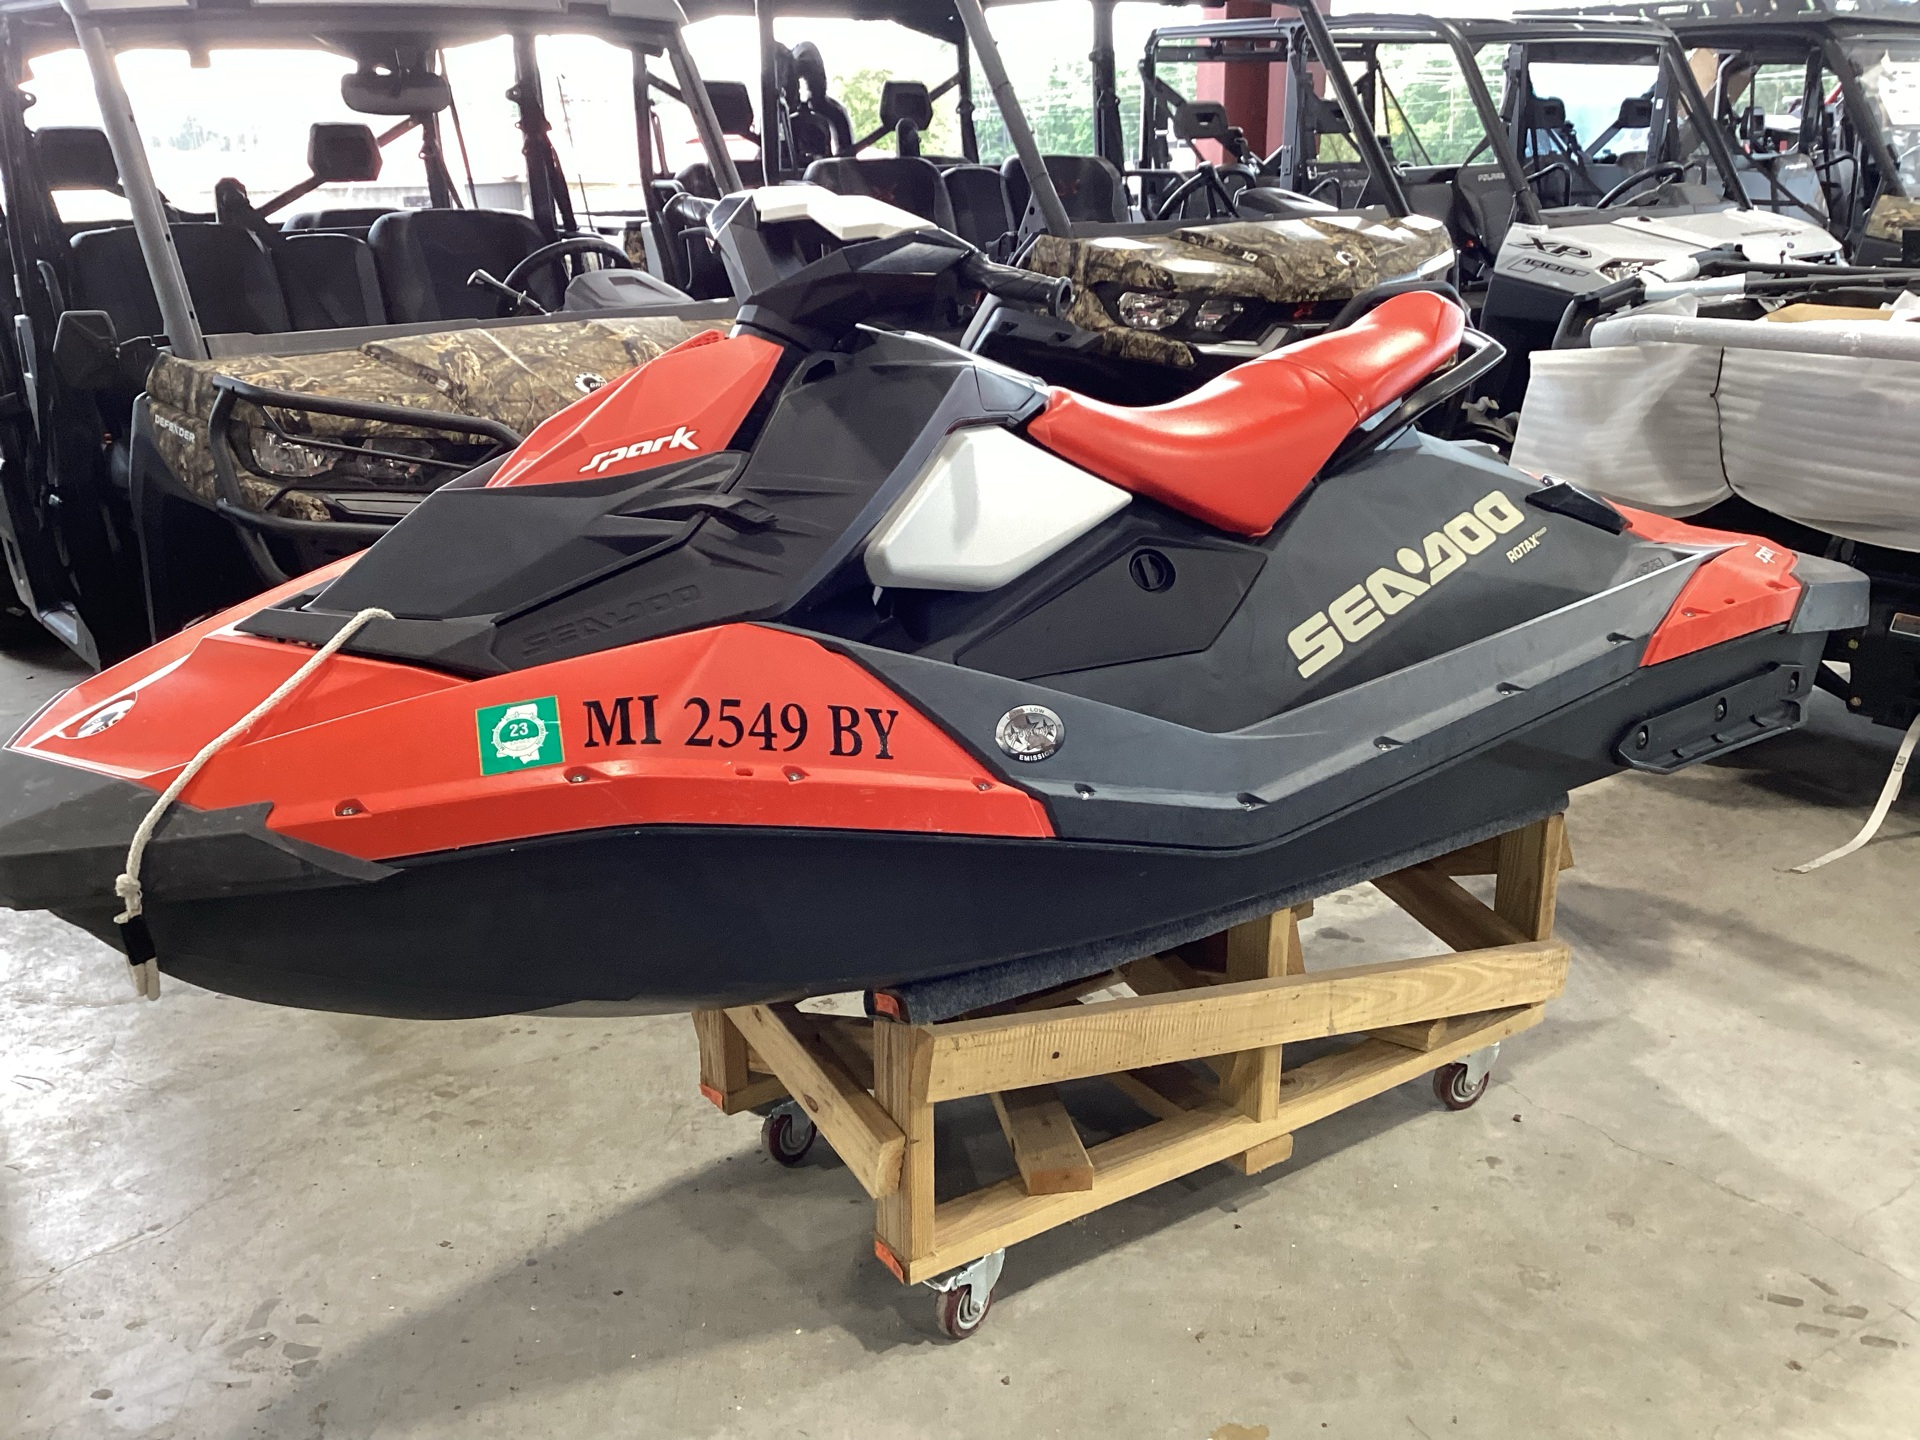 2017 Sea-Doo SPARK 2up 900 H.O. ACE in Saucier, Mississippi - Photo 3